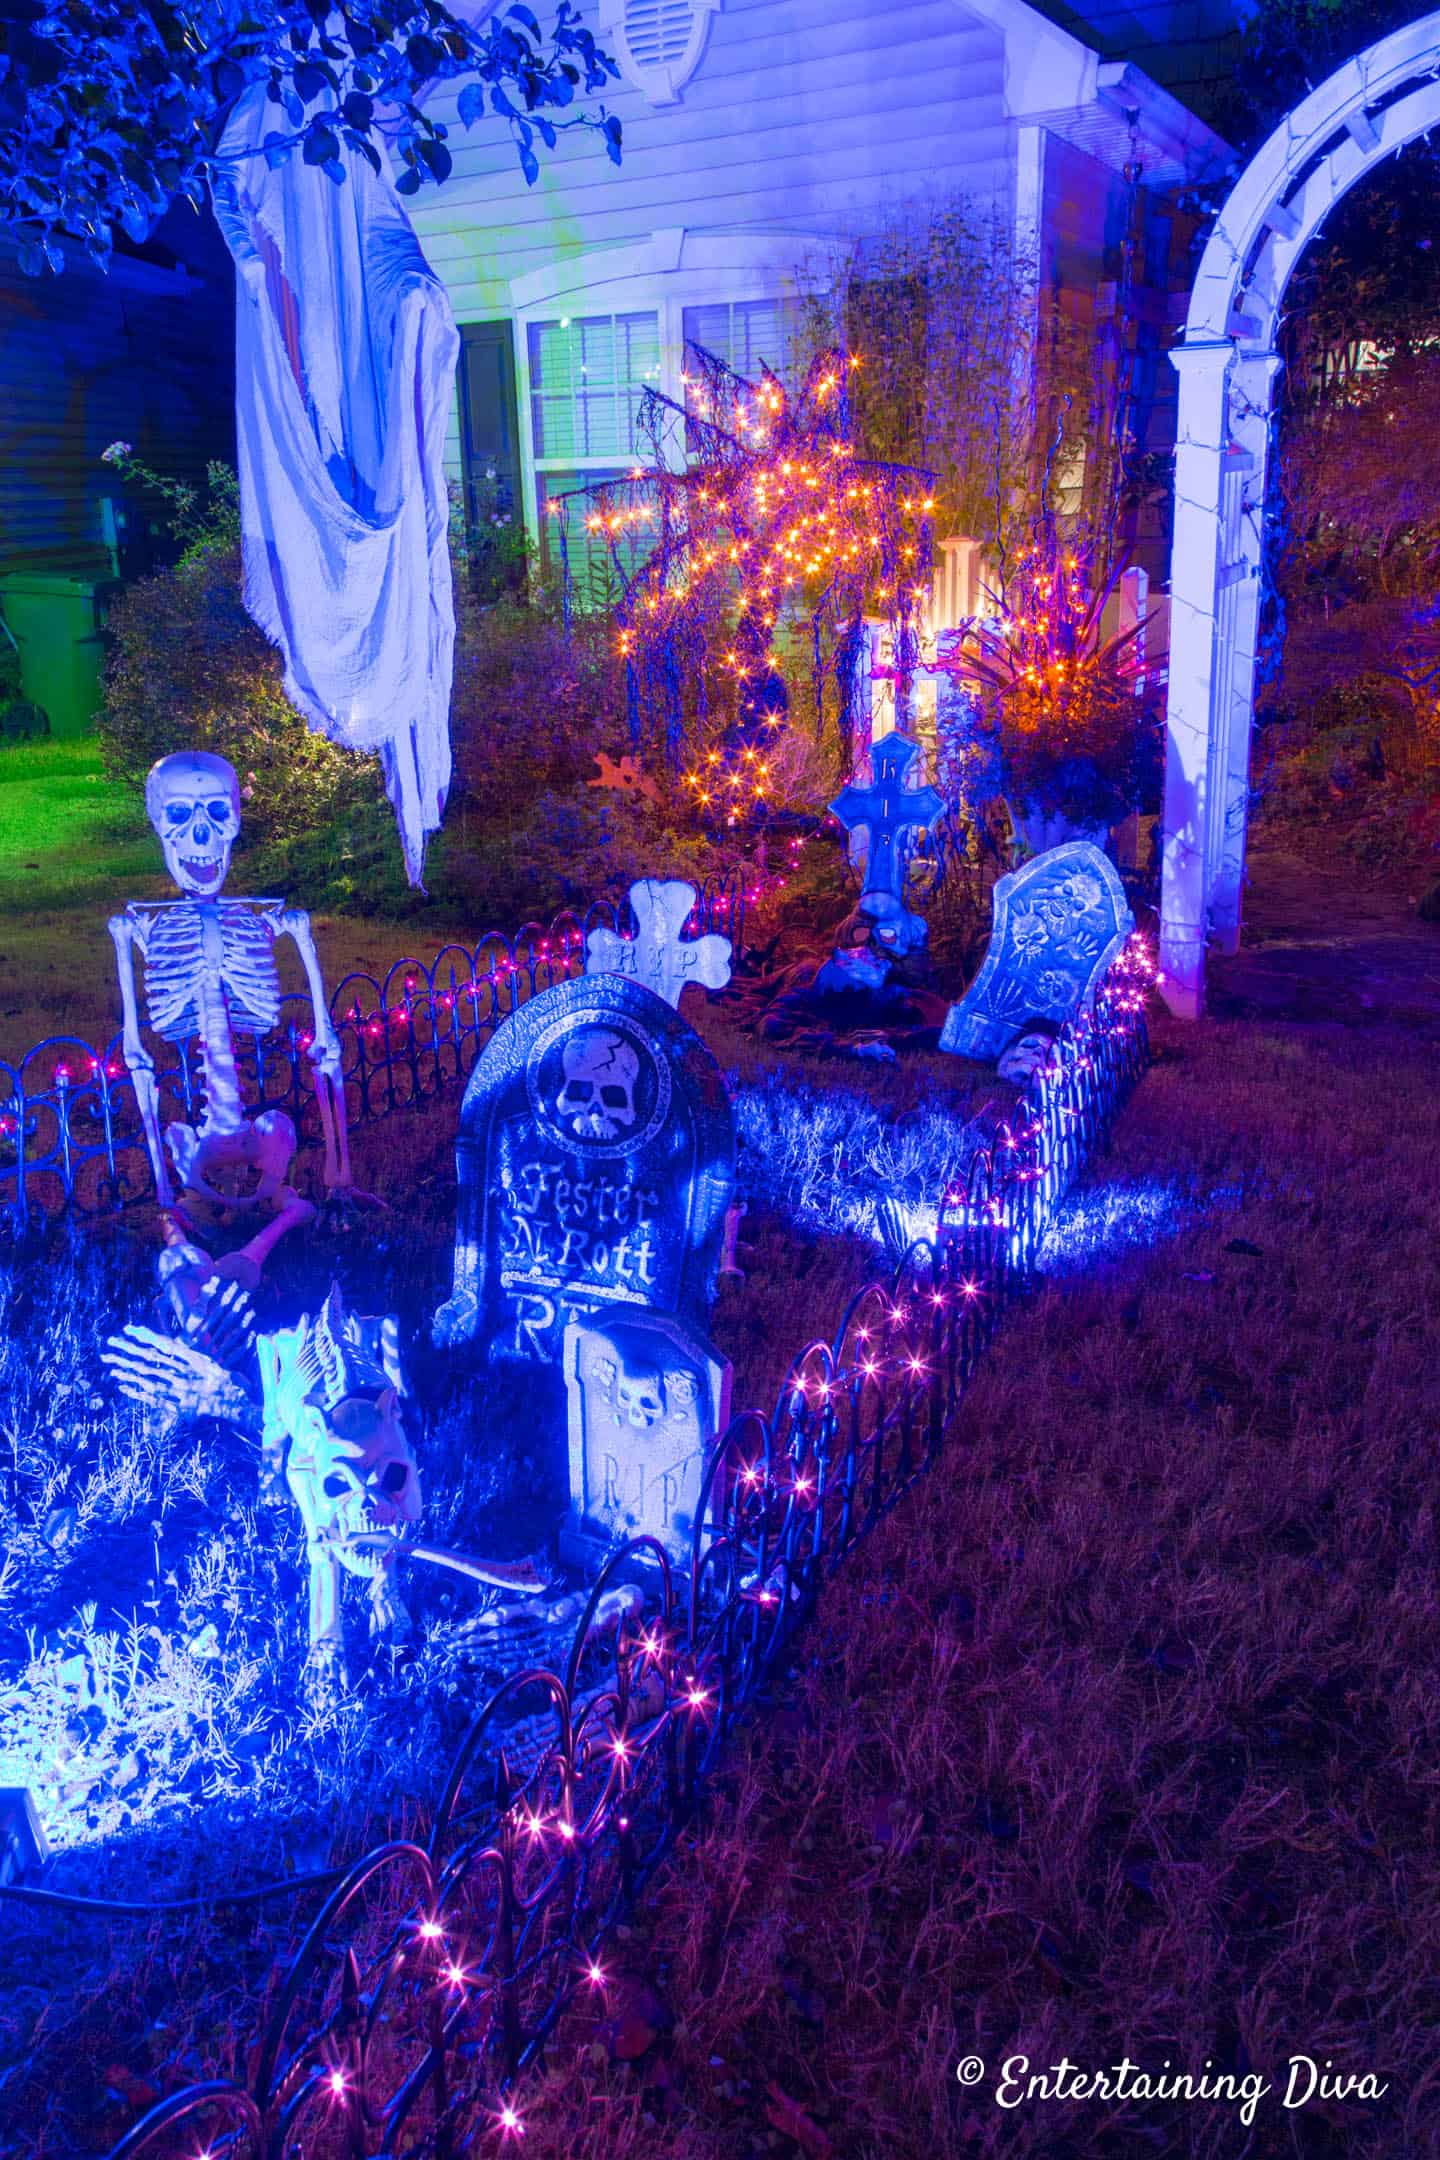 Halloween graveyard outlined by garden edging with lights